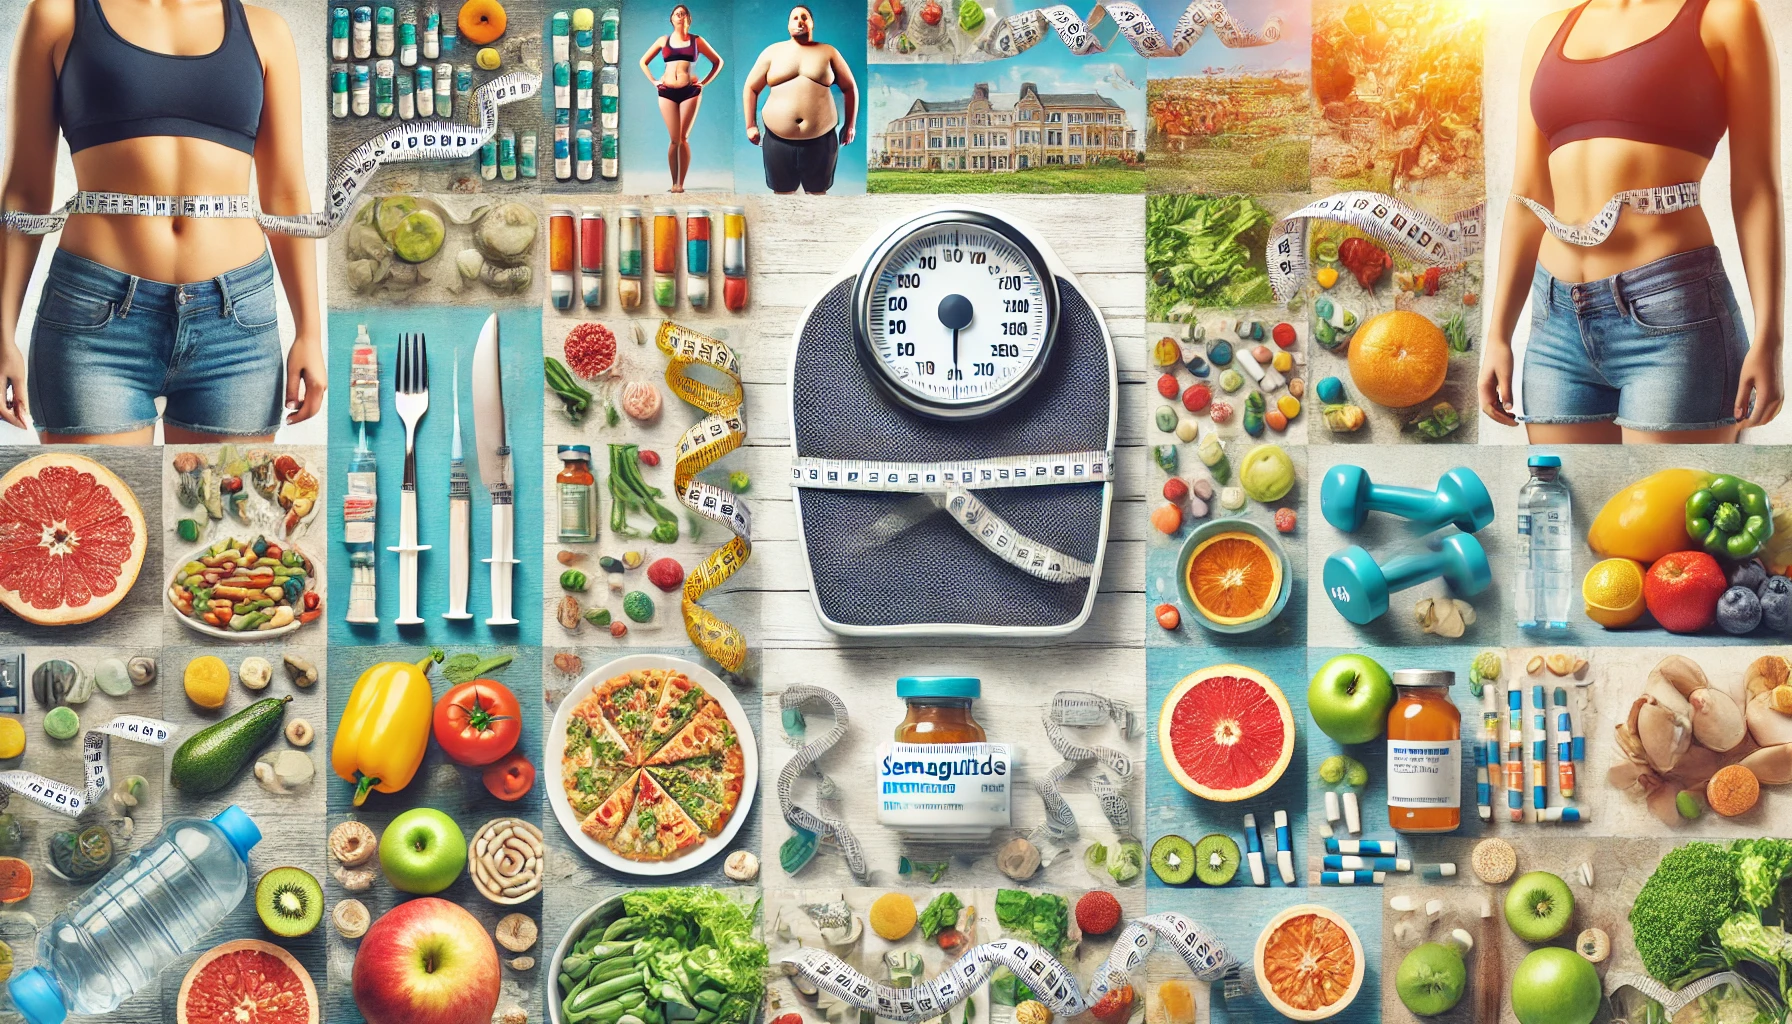 collage of weight loss images like a scale, weights, and exercise